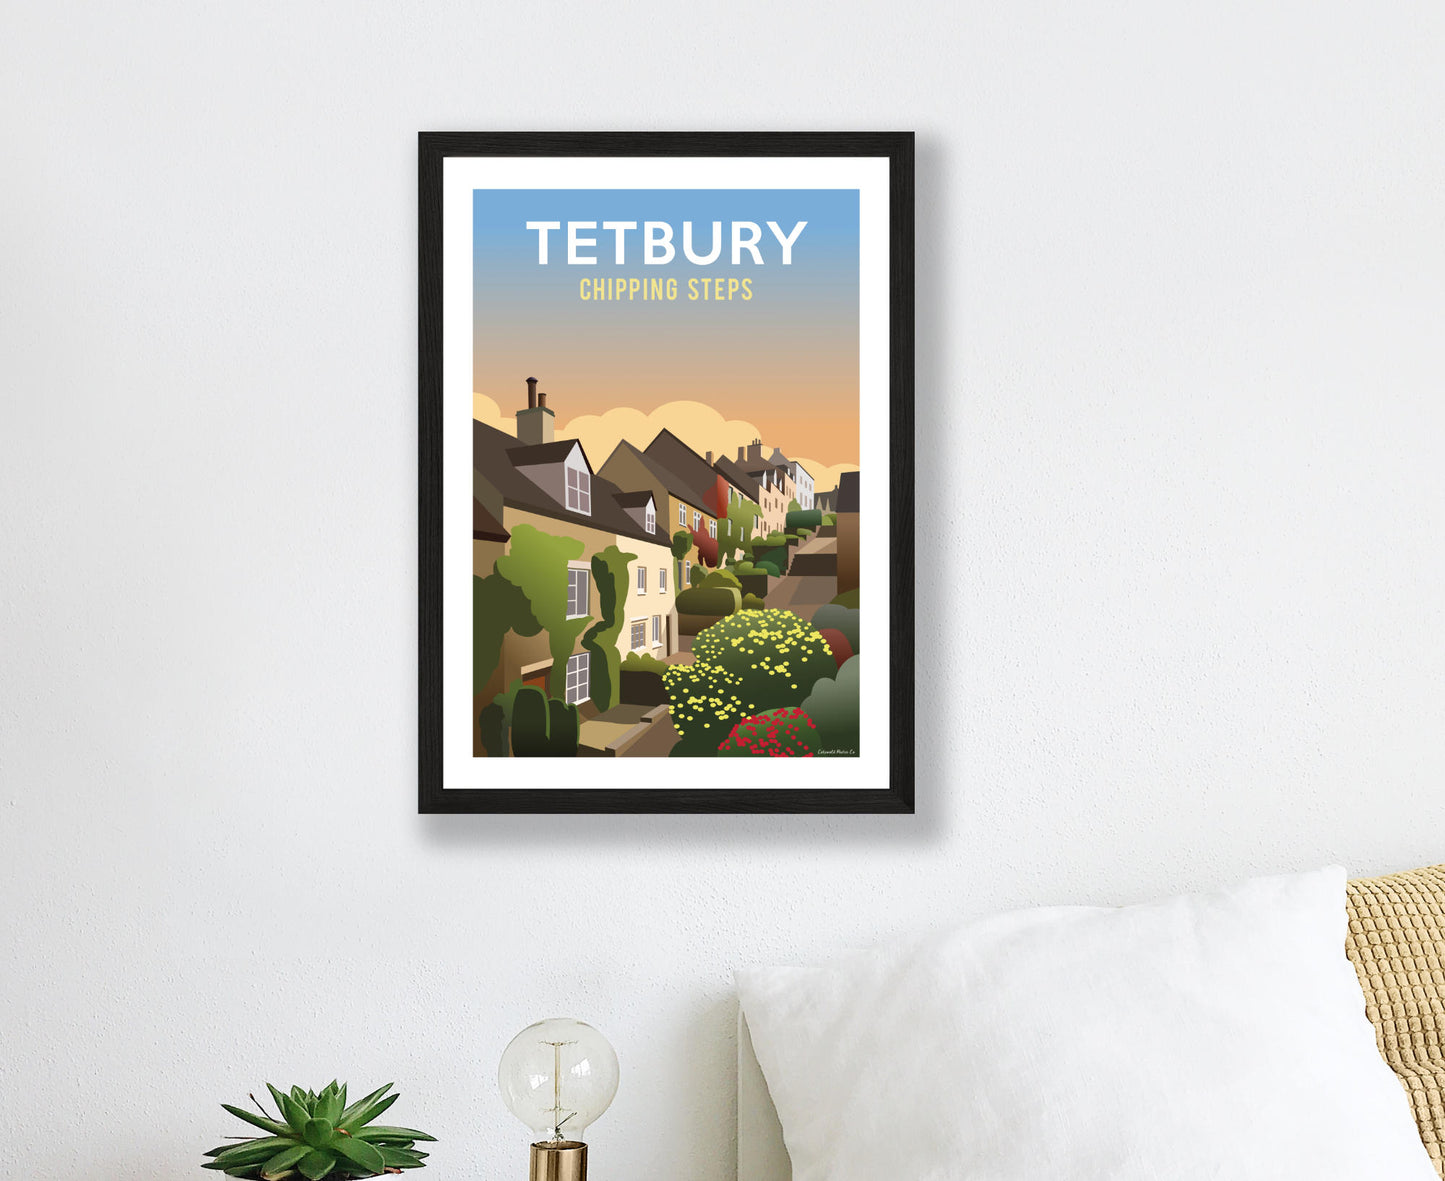 Tetbury Chipping Steps Poster in black frame